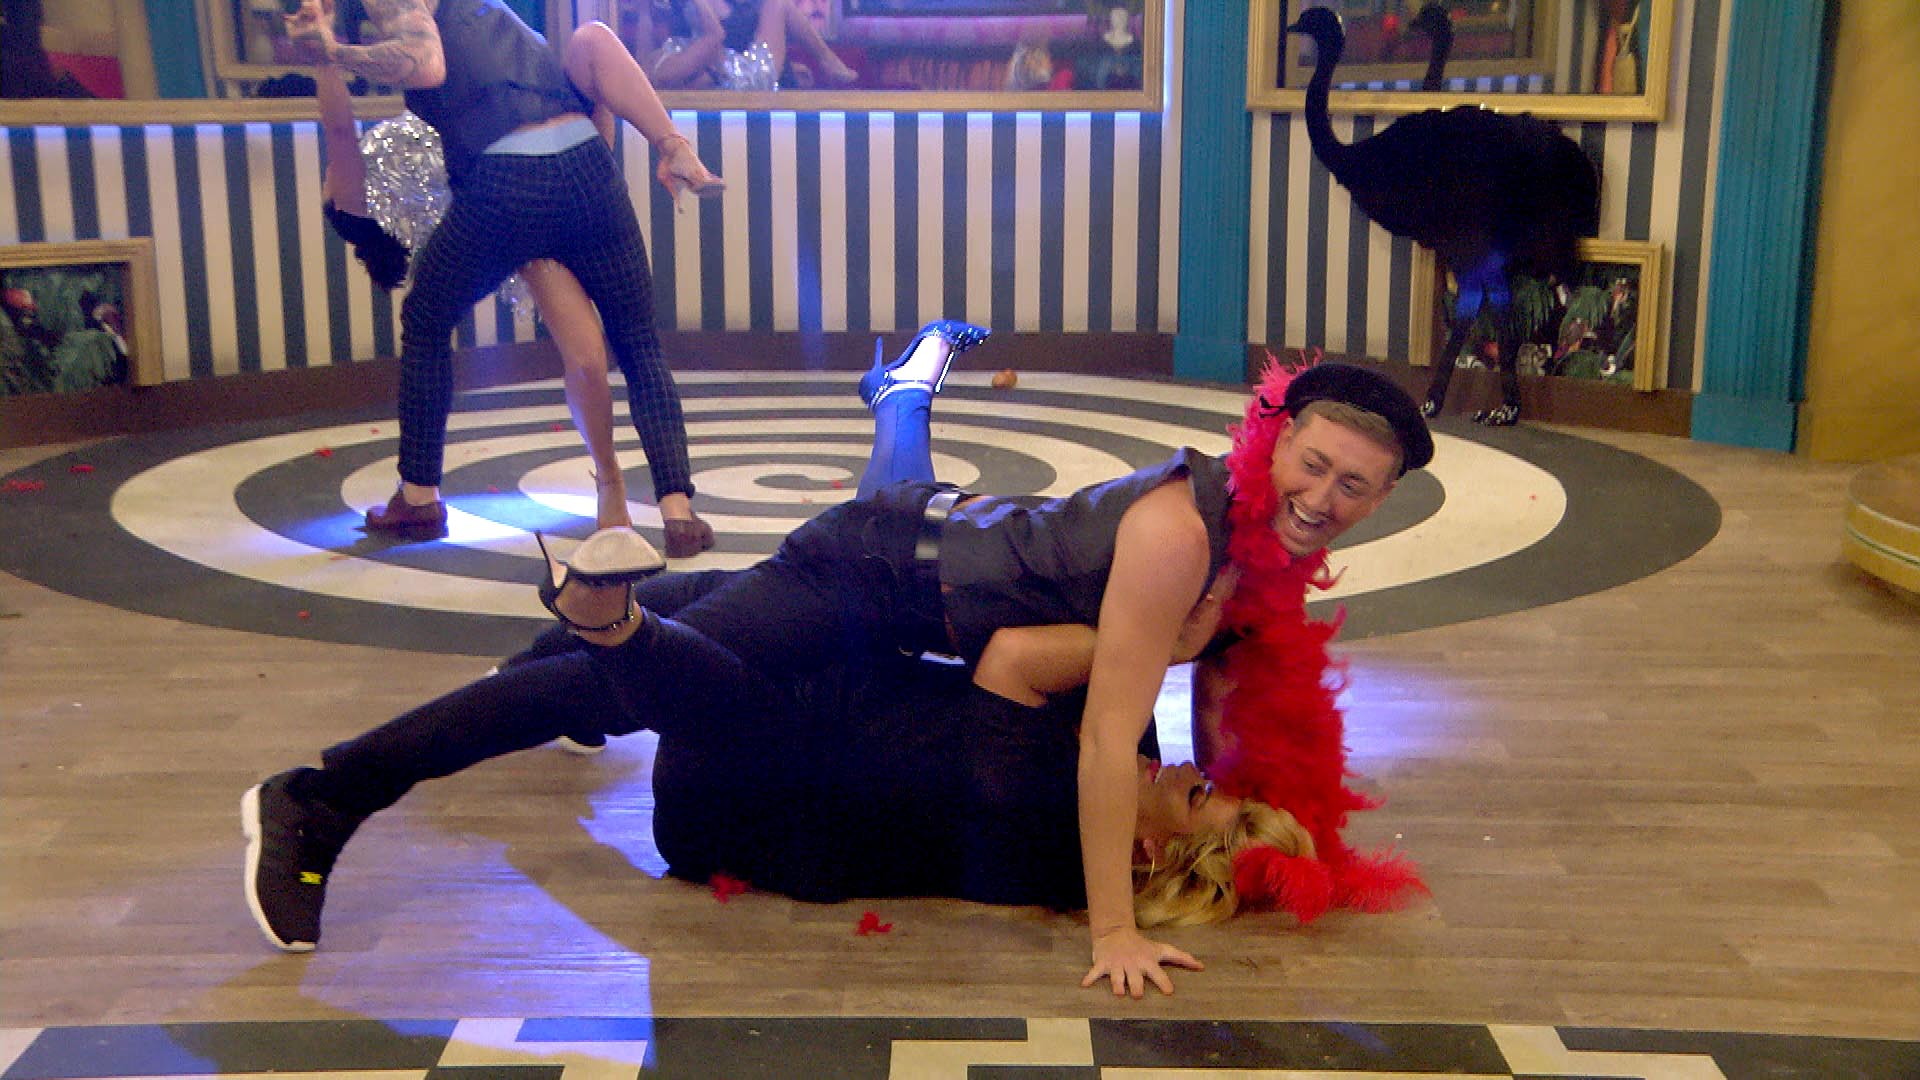 Day 15: Highlights from Day 14 in the Celebrity Big Brother House